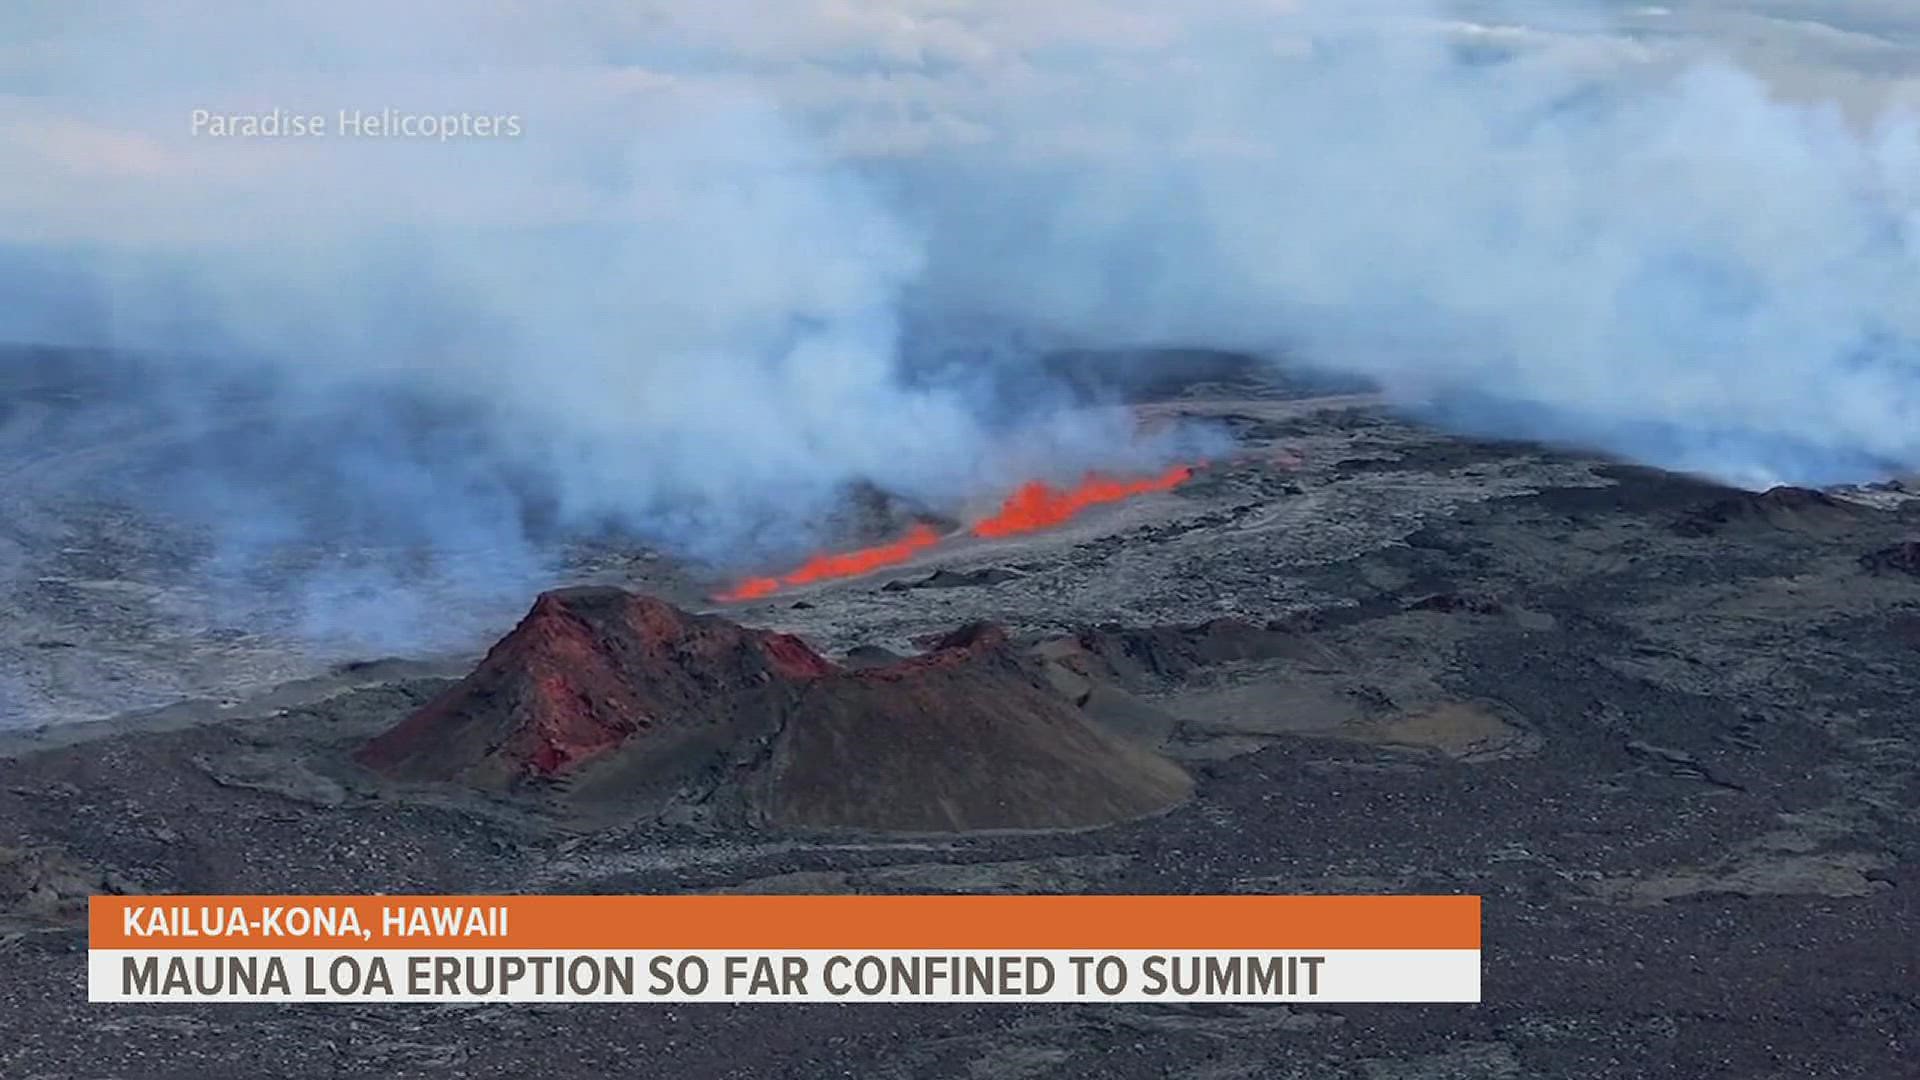 The US geological survey says the eruption began on Monday. Authorities say the lava streams are not threatening communities directly.